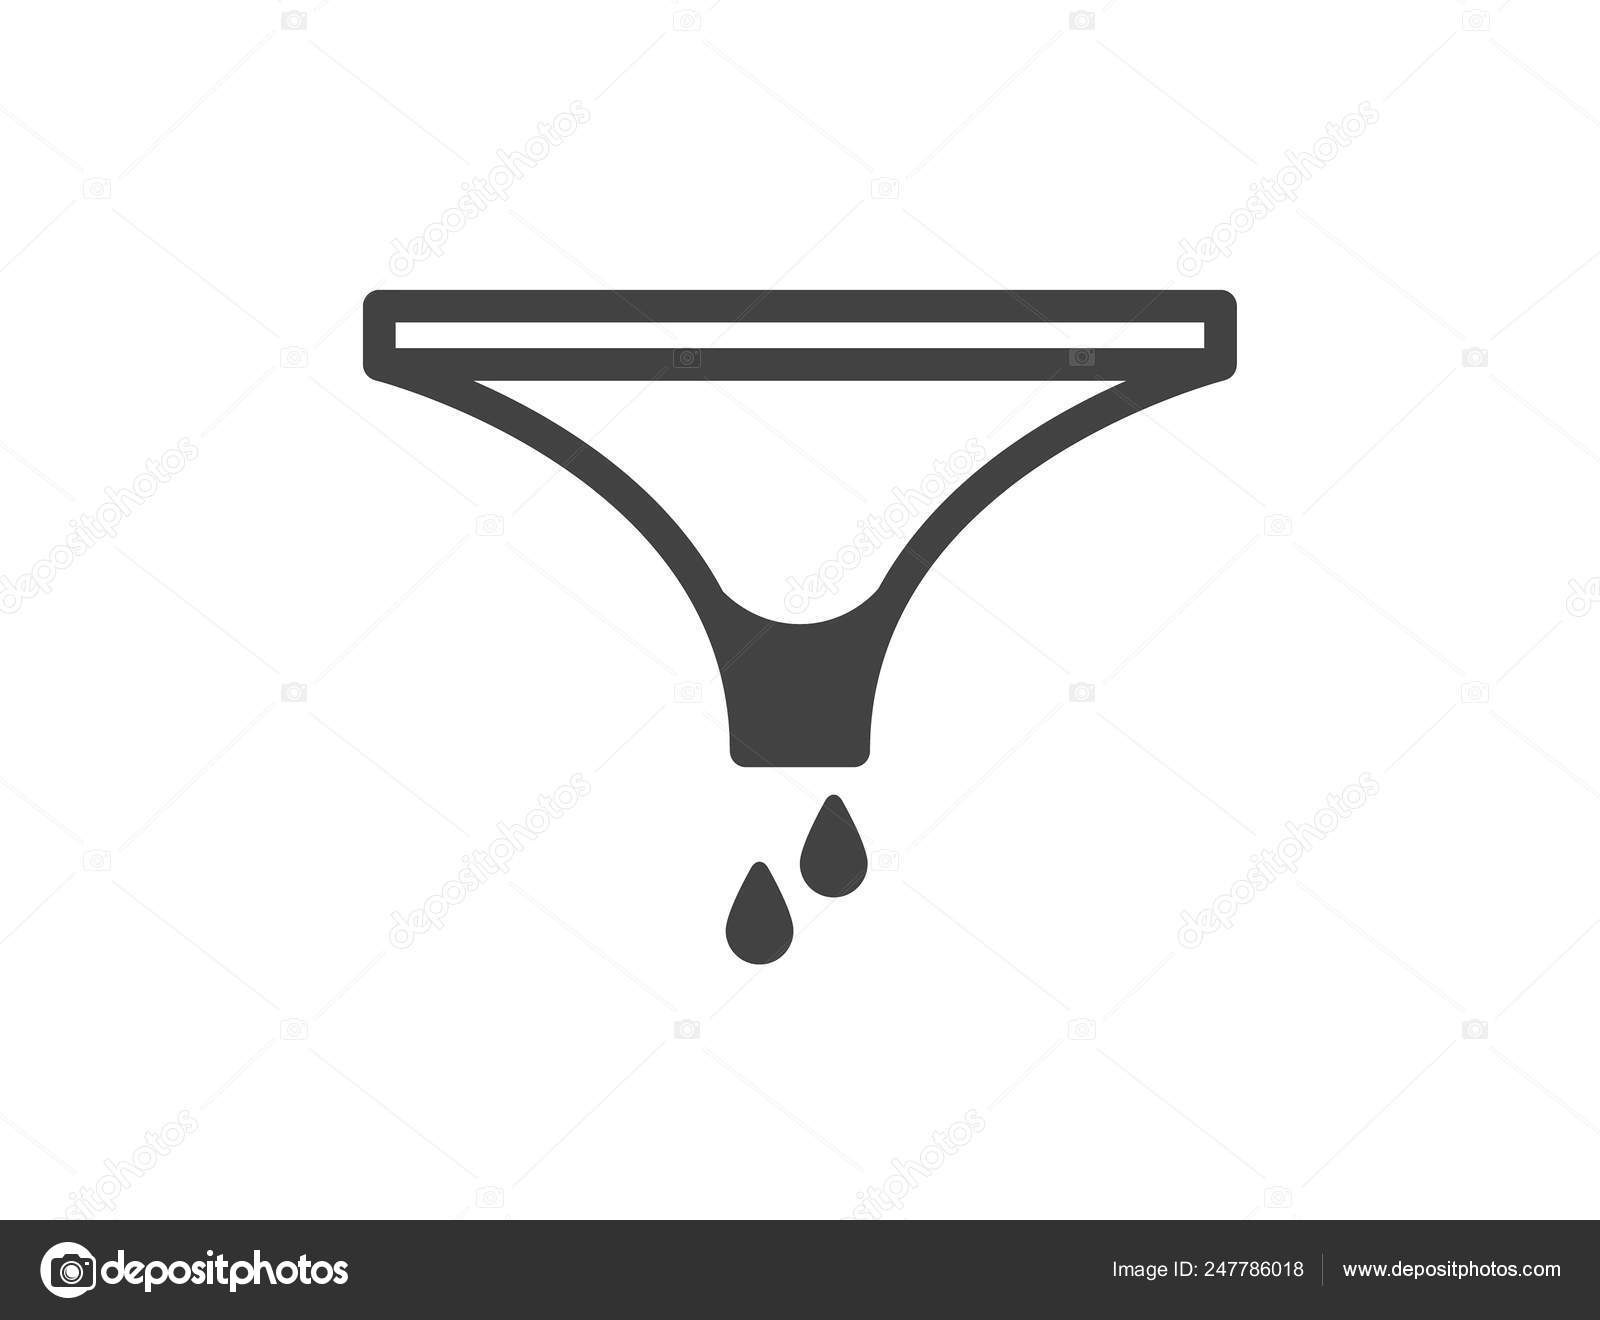 Pee, Or Blood Stain On Panties - Bloodstained Spot On Female